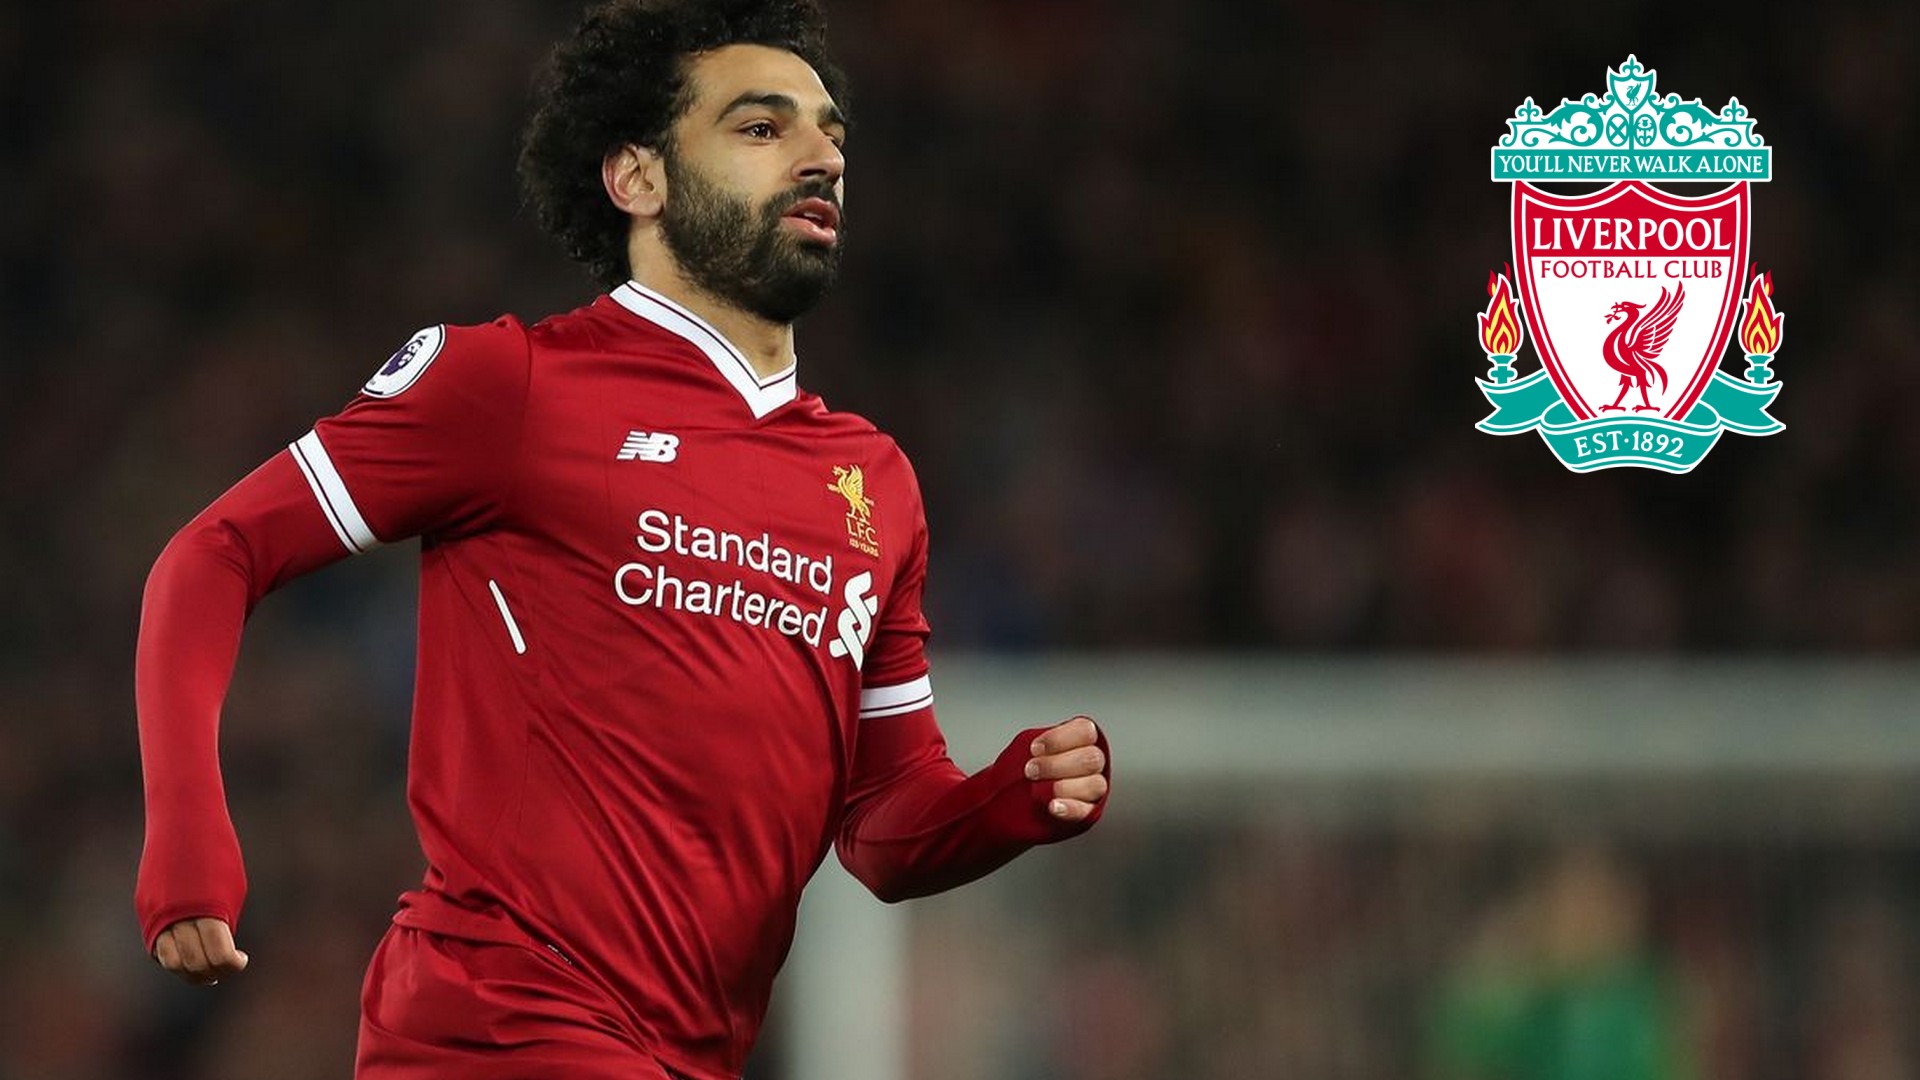 Wallpaper Mohamed Salah with image resolution 1920x1080 pixel. You can use this wallpaper as background for your desktop Computer Screensavers, Android or iPhone smartphones